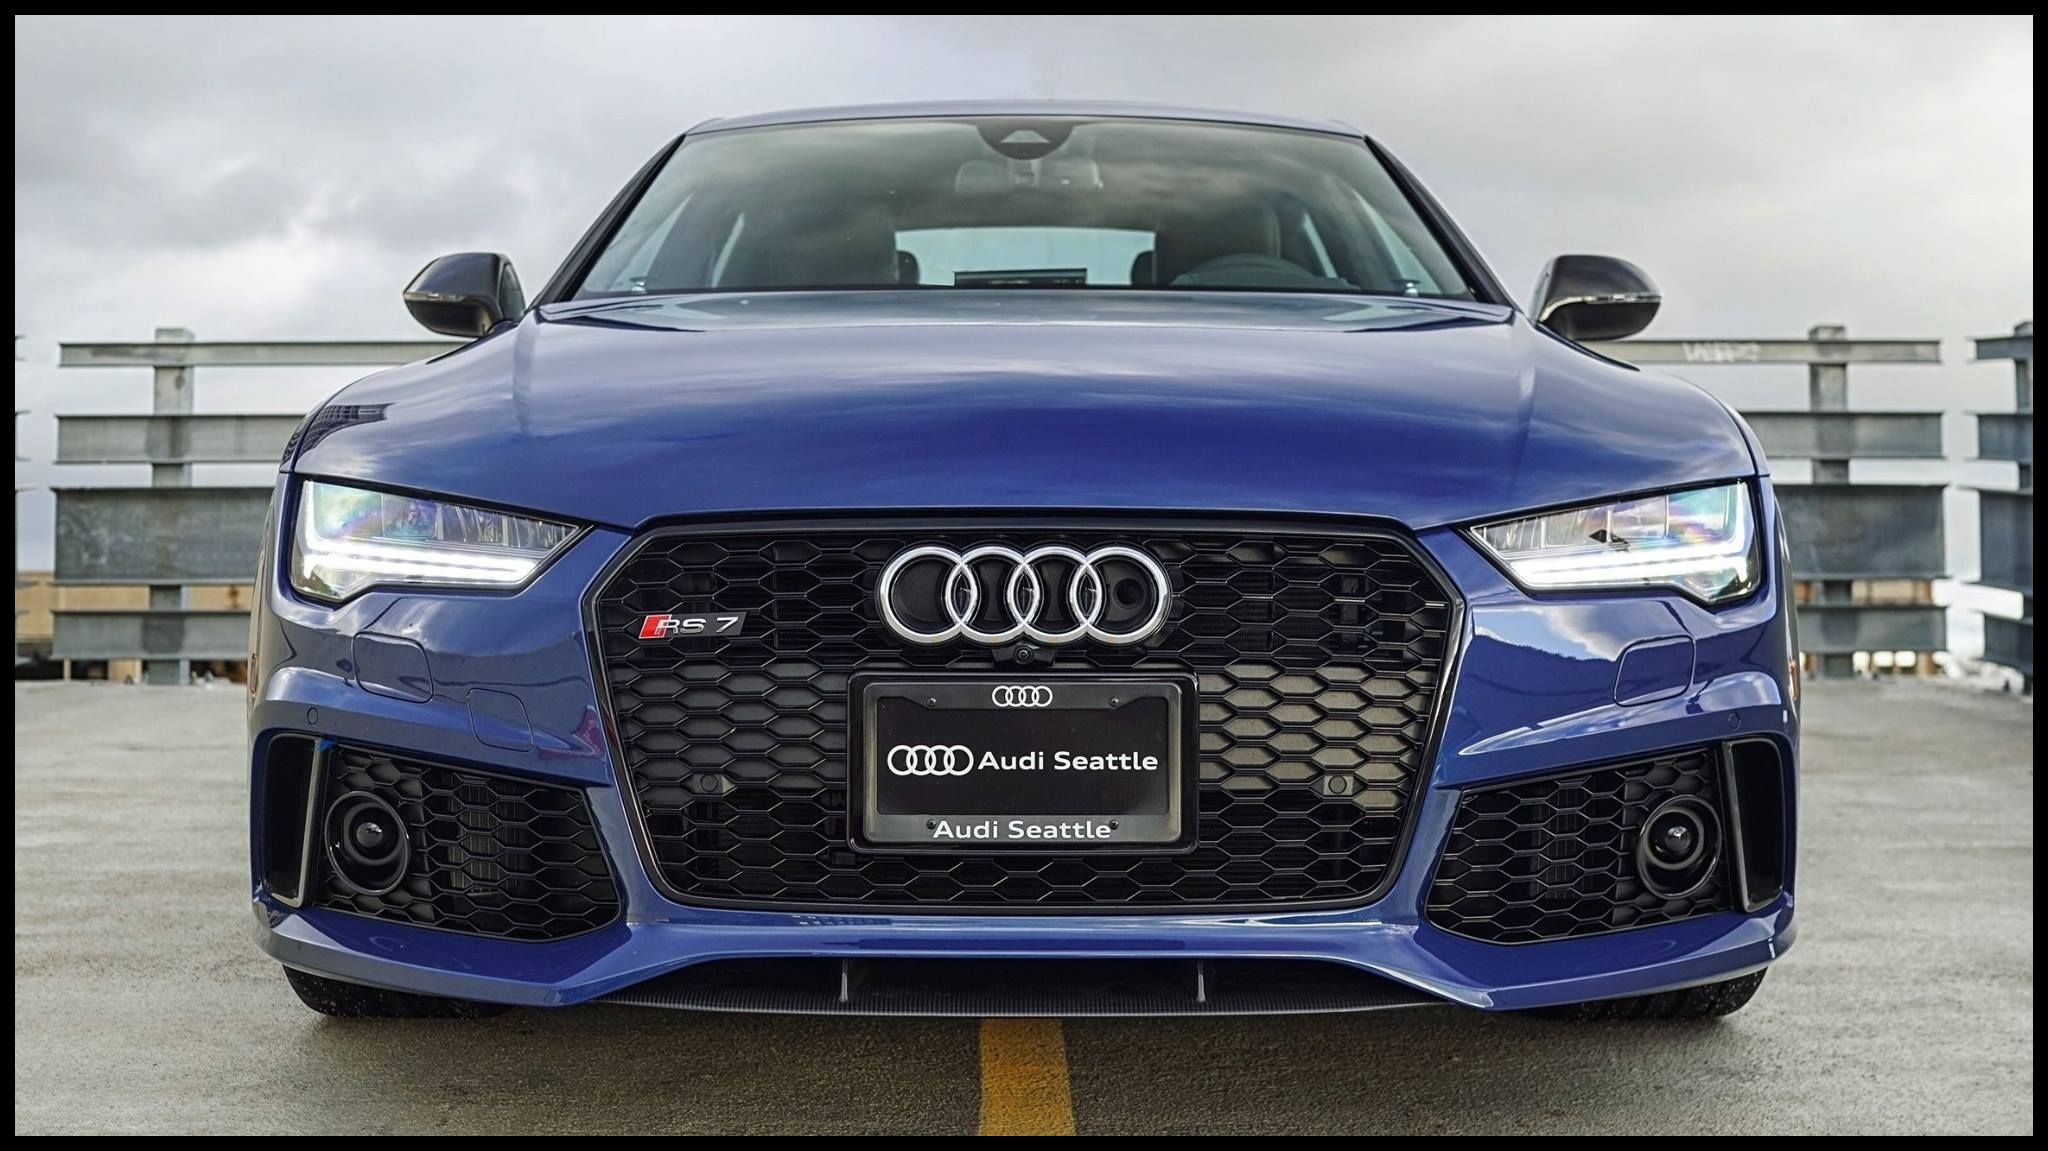 Ascari Blue RS7 Performance all up in your grille